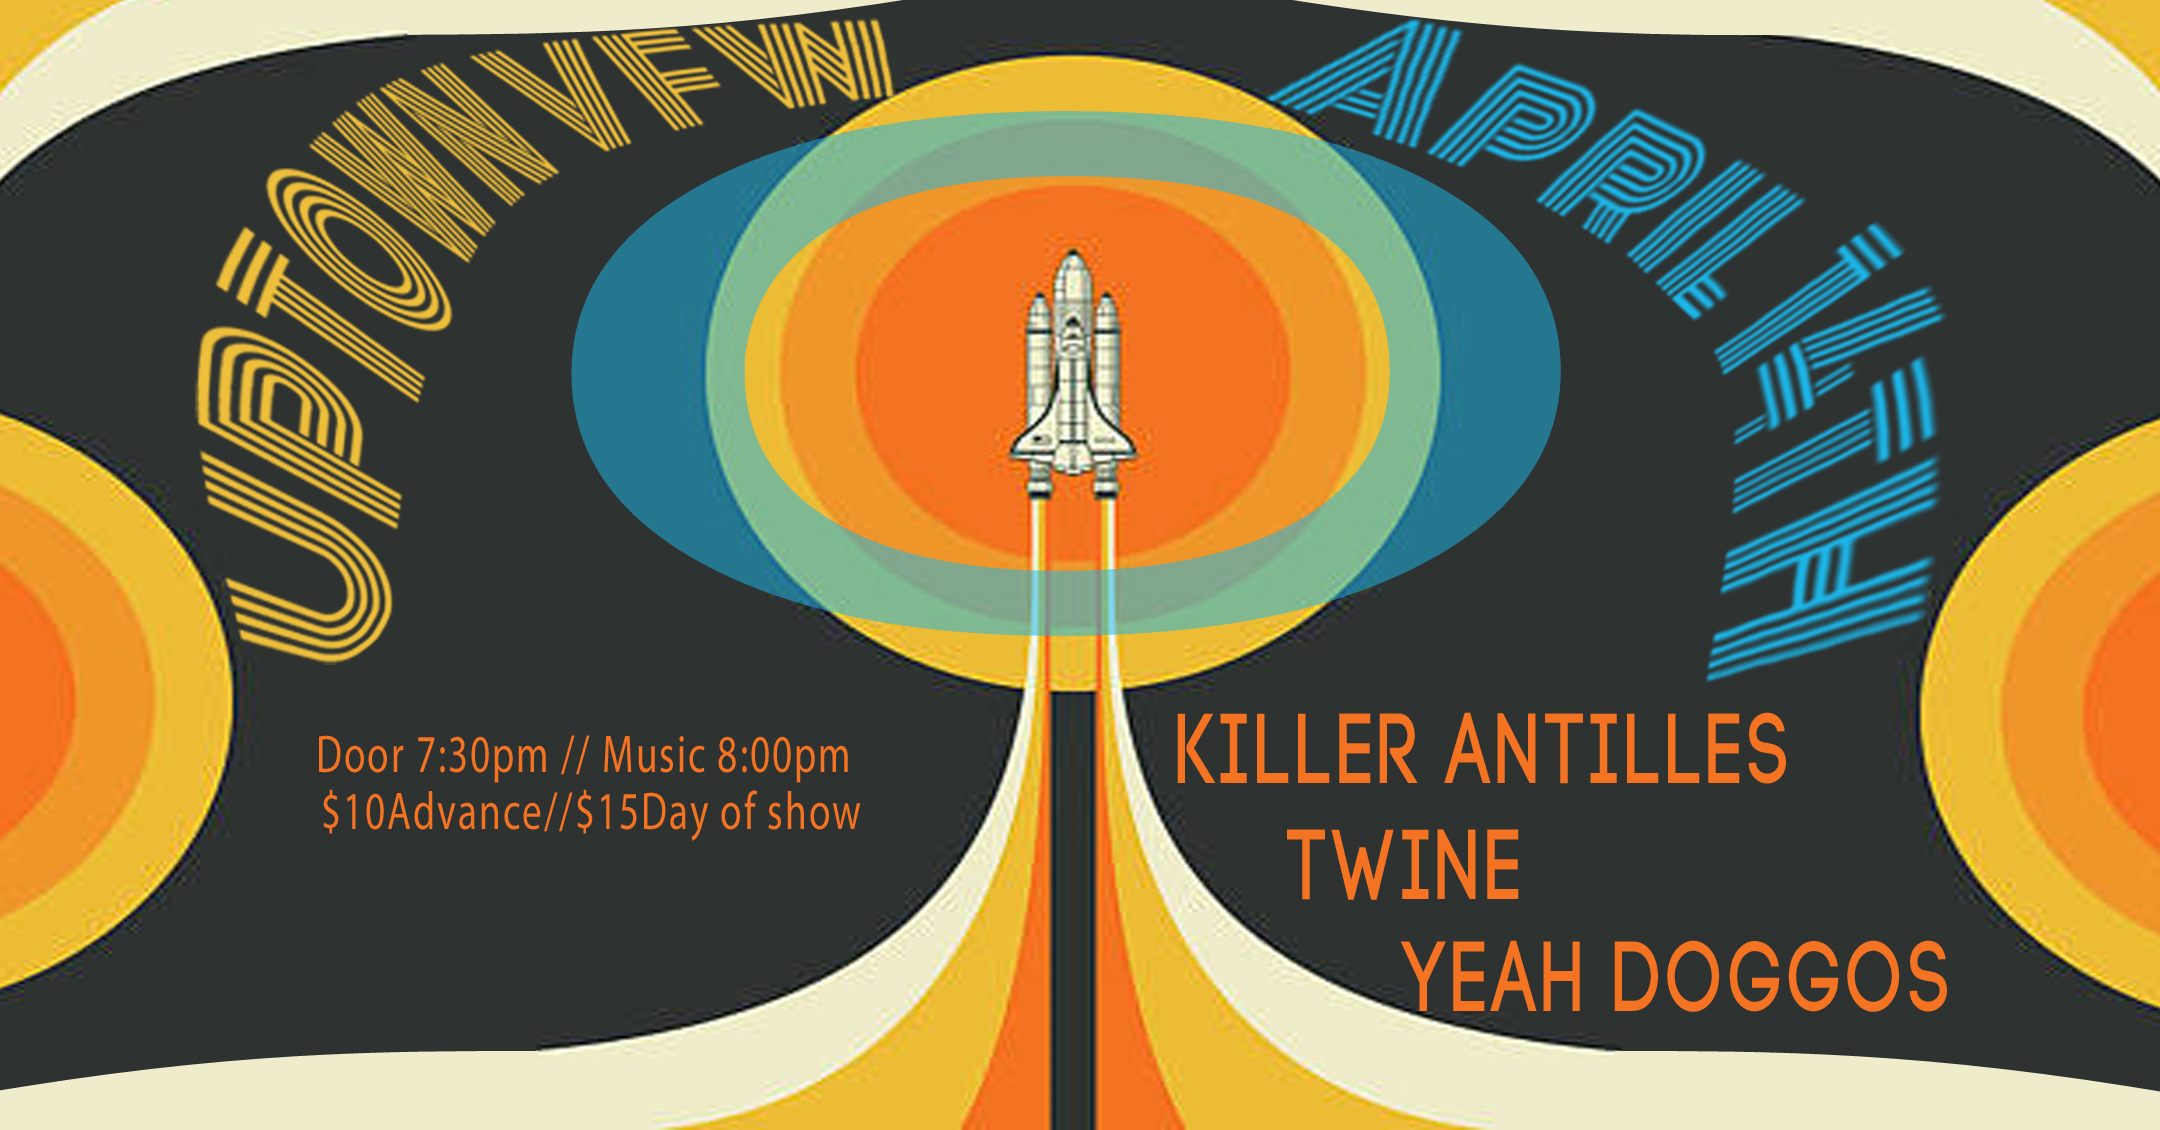 Killer Antilles TWINE Yeah Doggos Friday, April 14 James Ballentine "Uptown" VFW Post 246 Doors 8:00pm :: Music 8:30pm :: 21+ GA $10 ADV / $15 DOS NO REFUNDS Tickets On-Sale Now